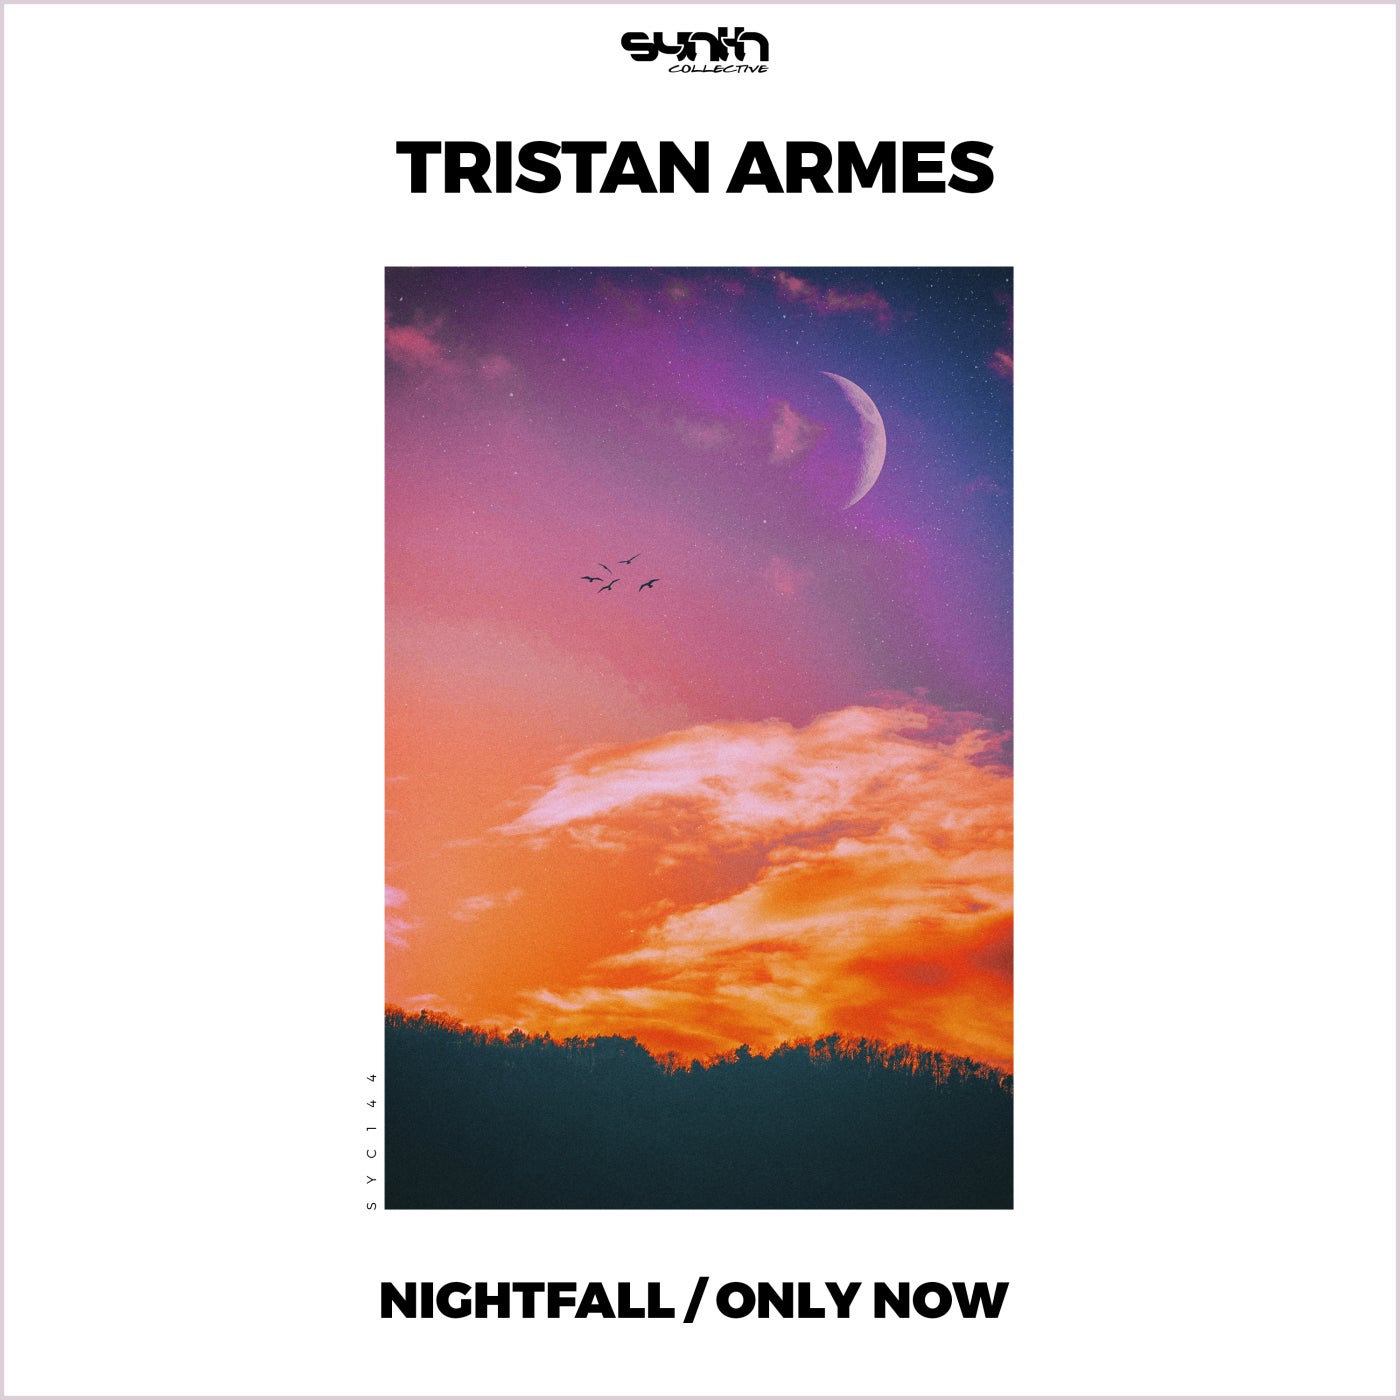 Nightfall / Only Now